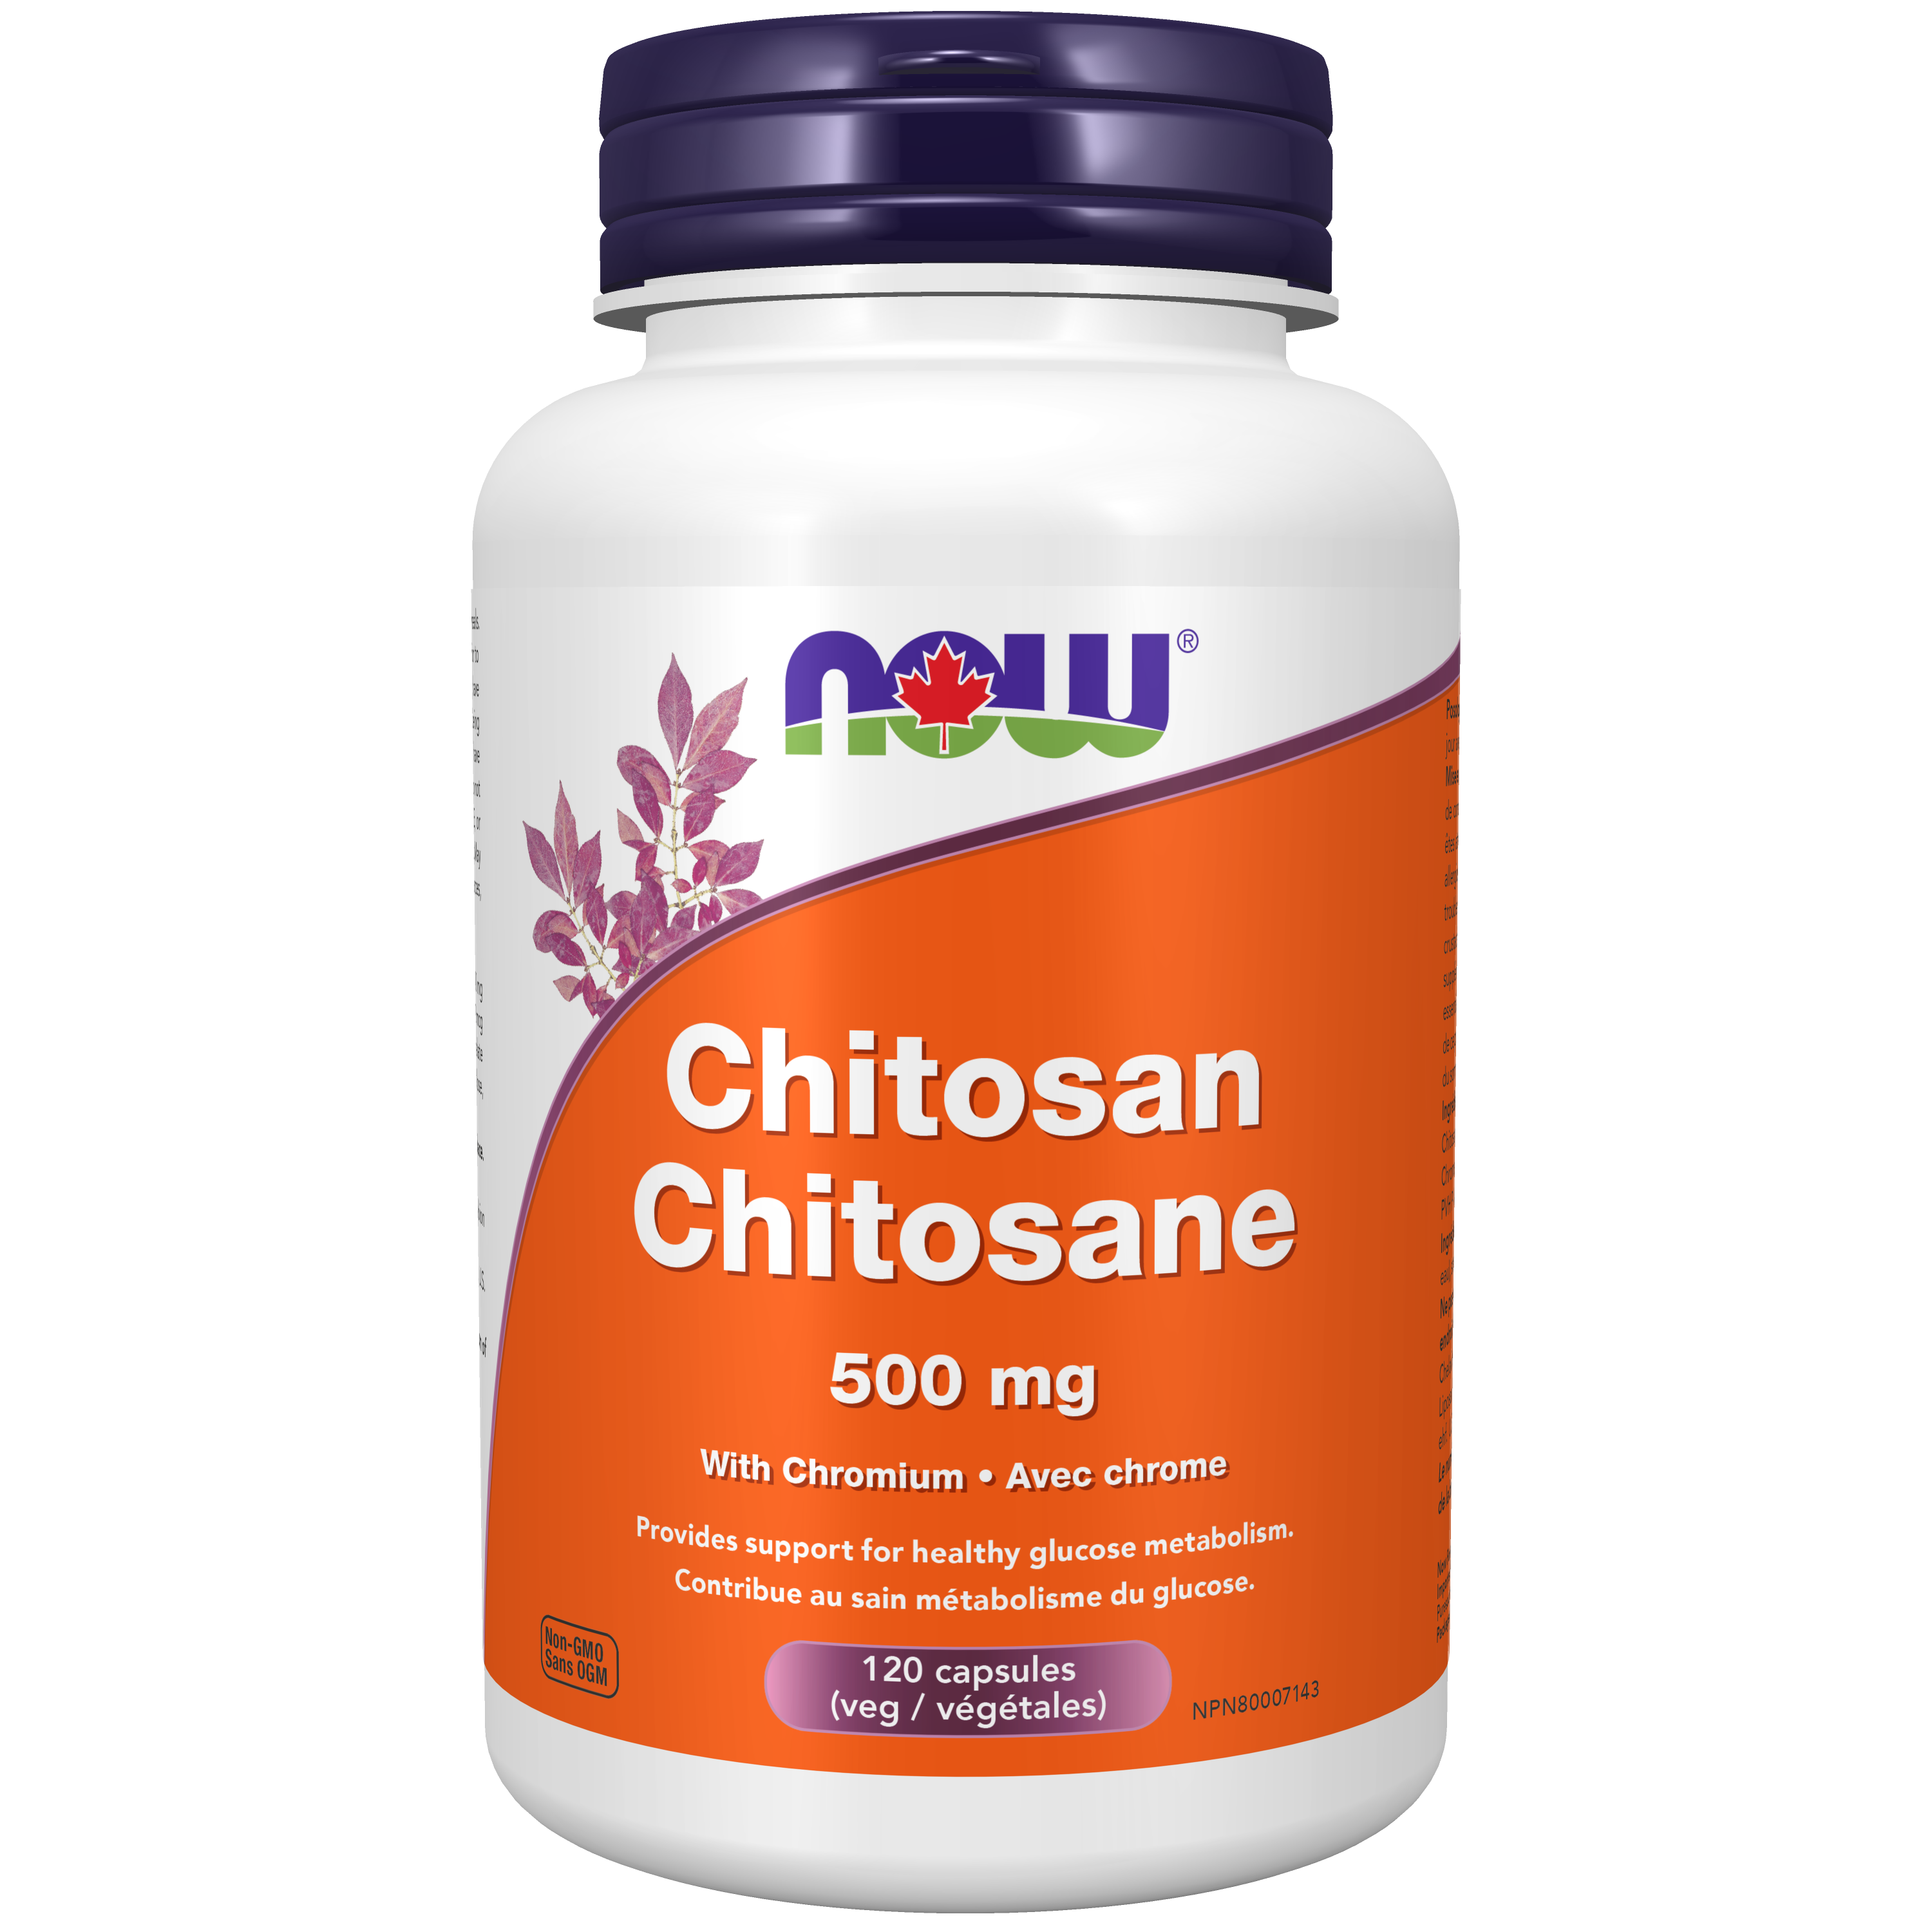 Chitosan for metabolism